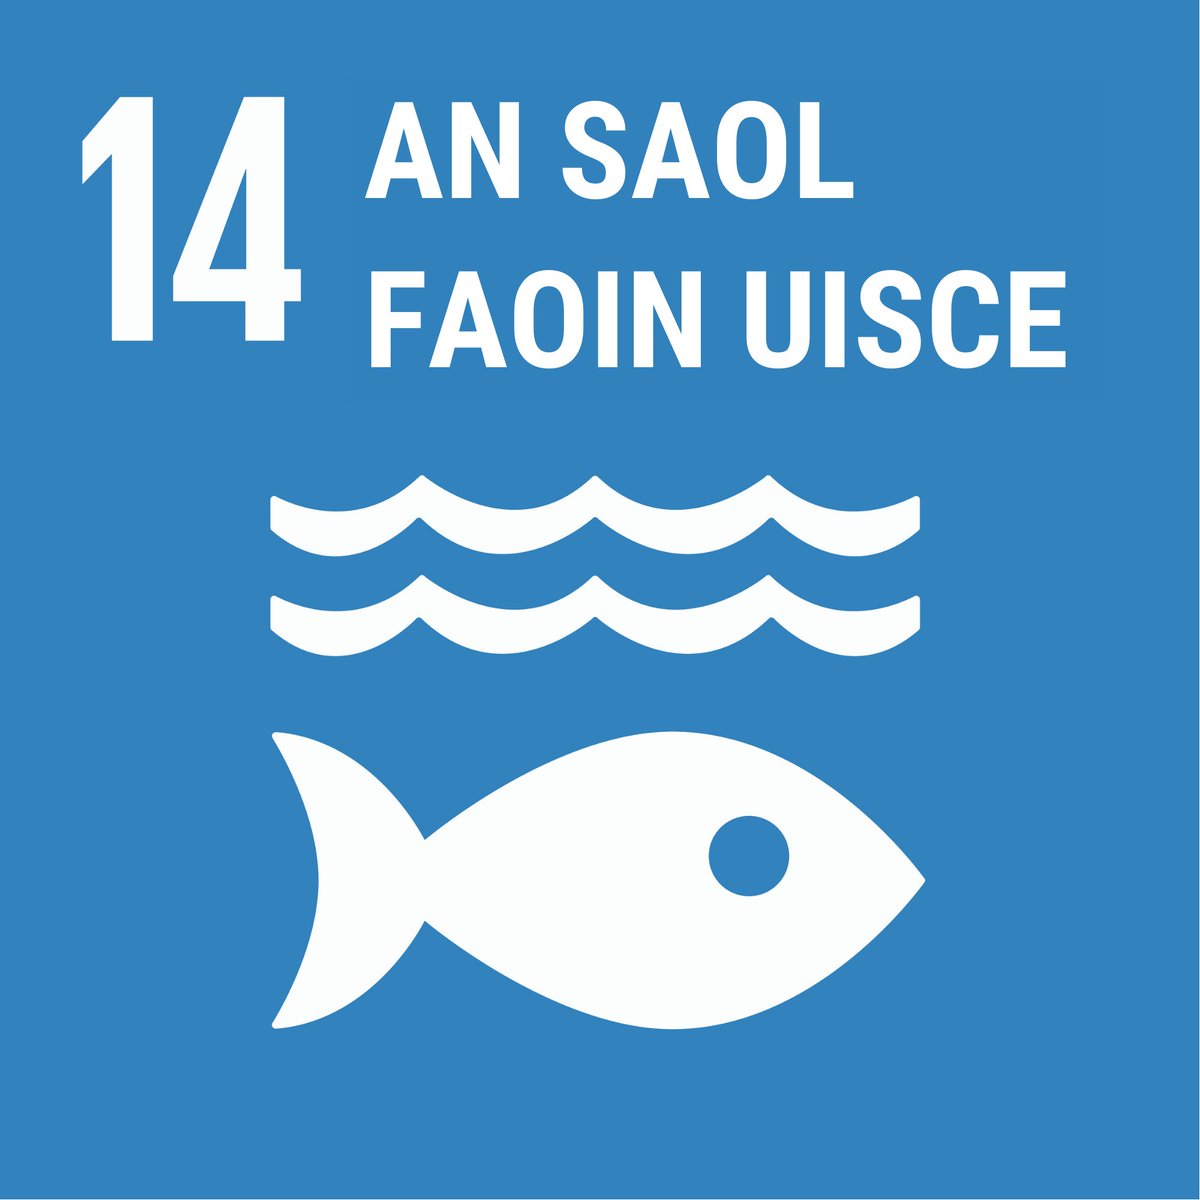 #SDG14 Conserve and sustainably use the oceans, seas and marine resources for sustainable development. Learn about #SDG14 in @Oide_Science LO 5.5 @OECDEduSkills @Dept_ECC @Education_Ire #take1mayday #take1programme @NCCAie @NAPD_IE